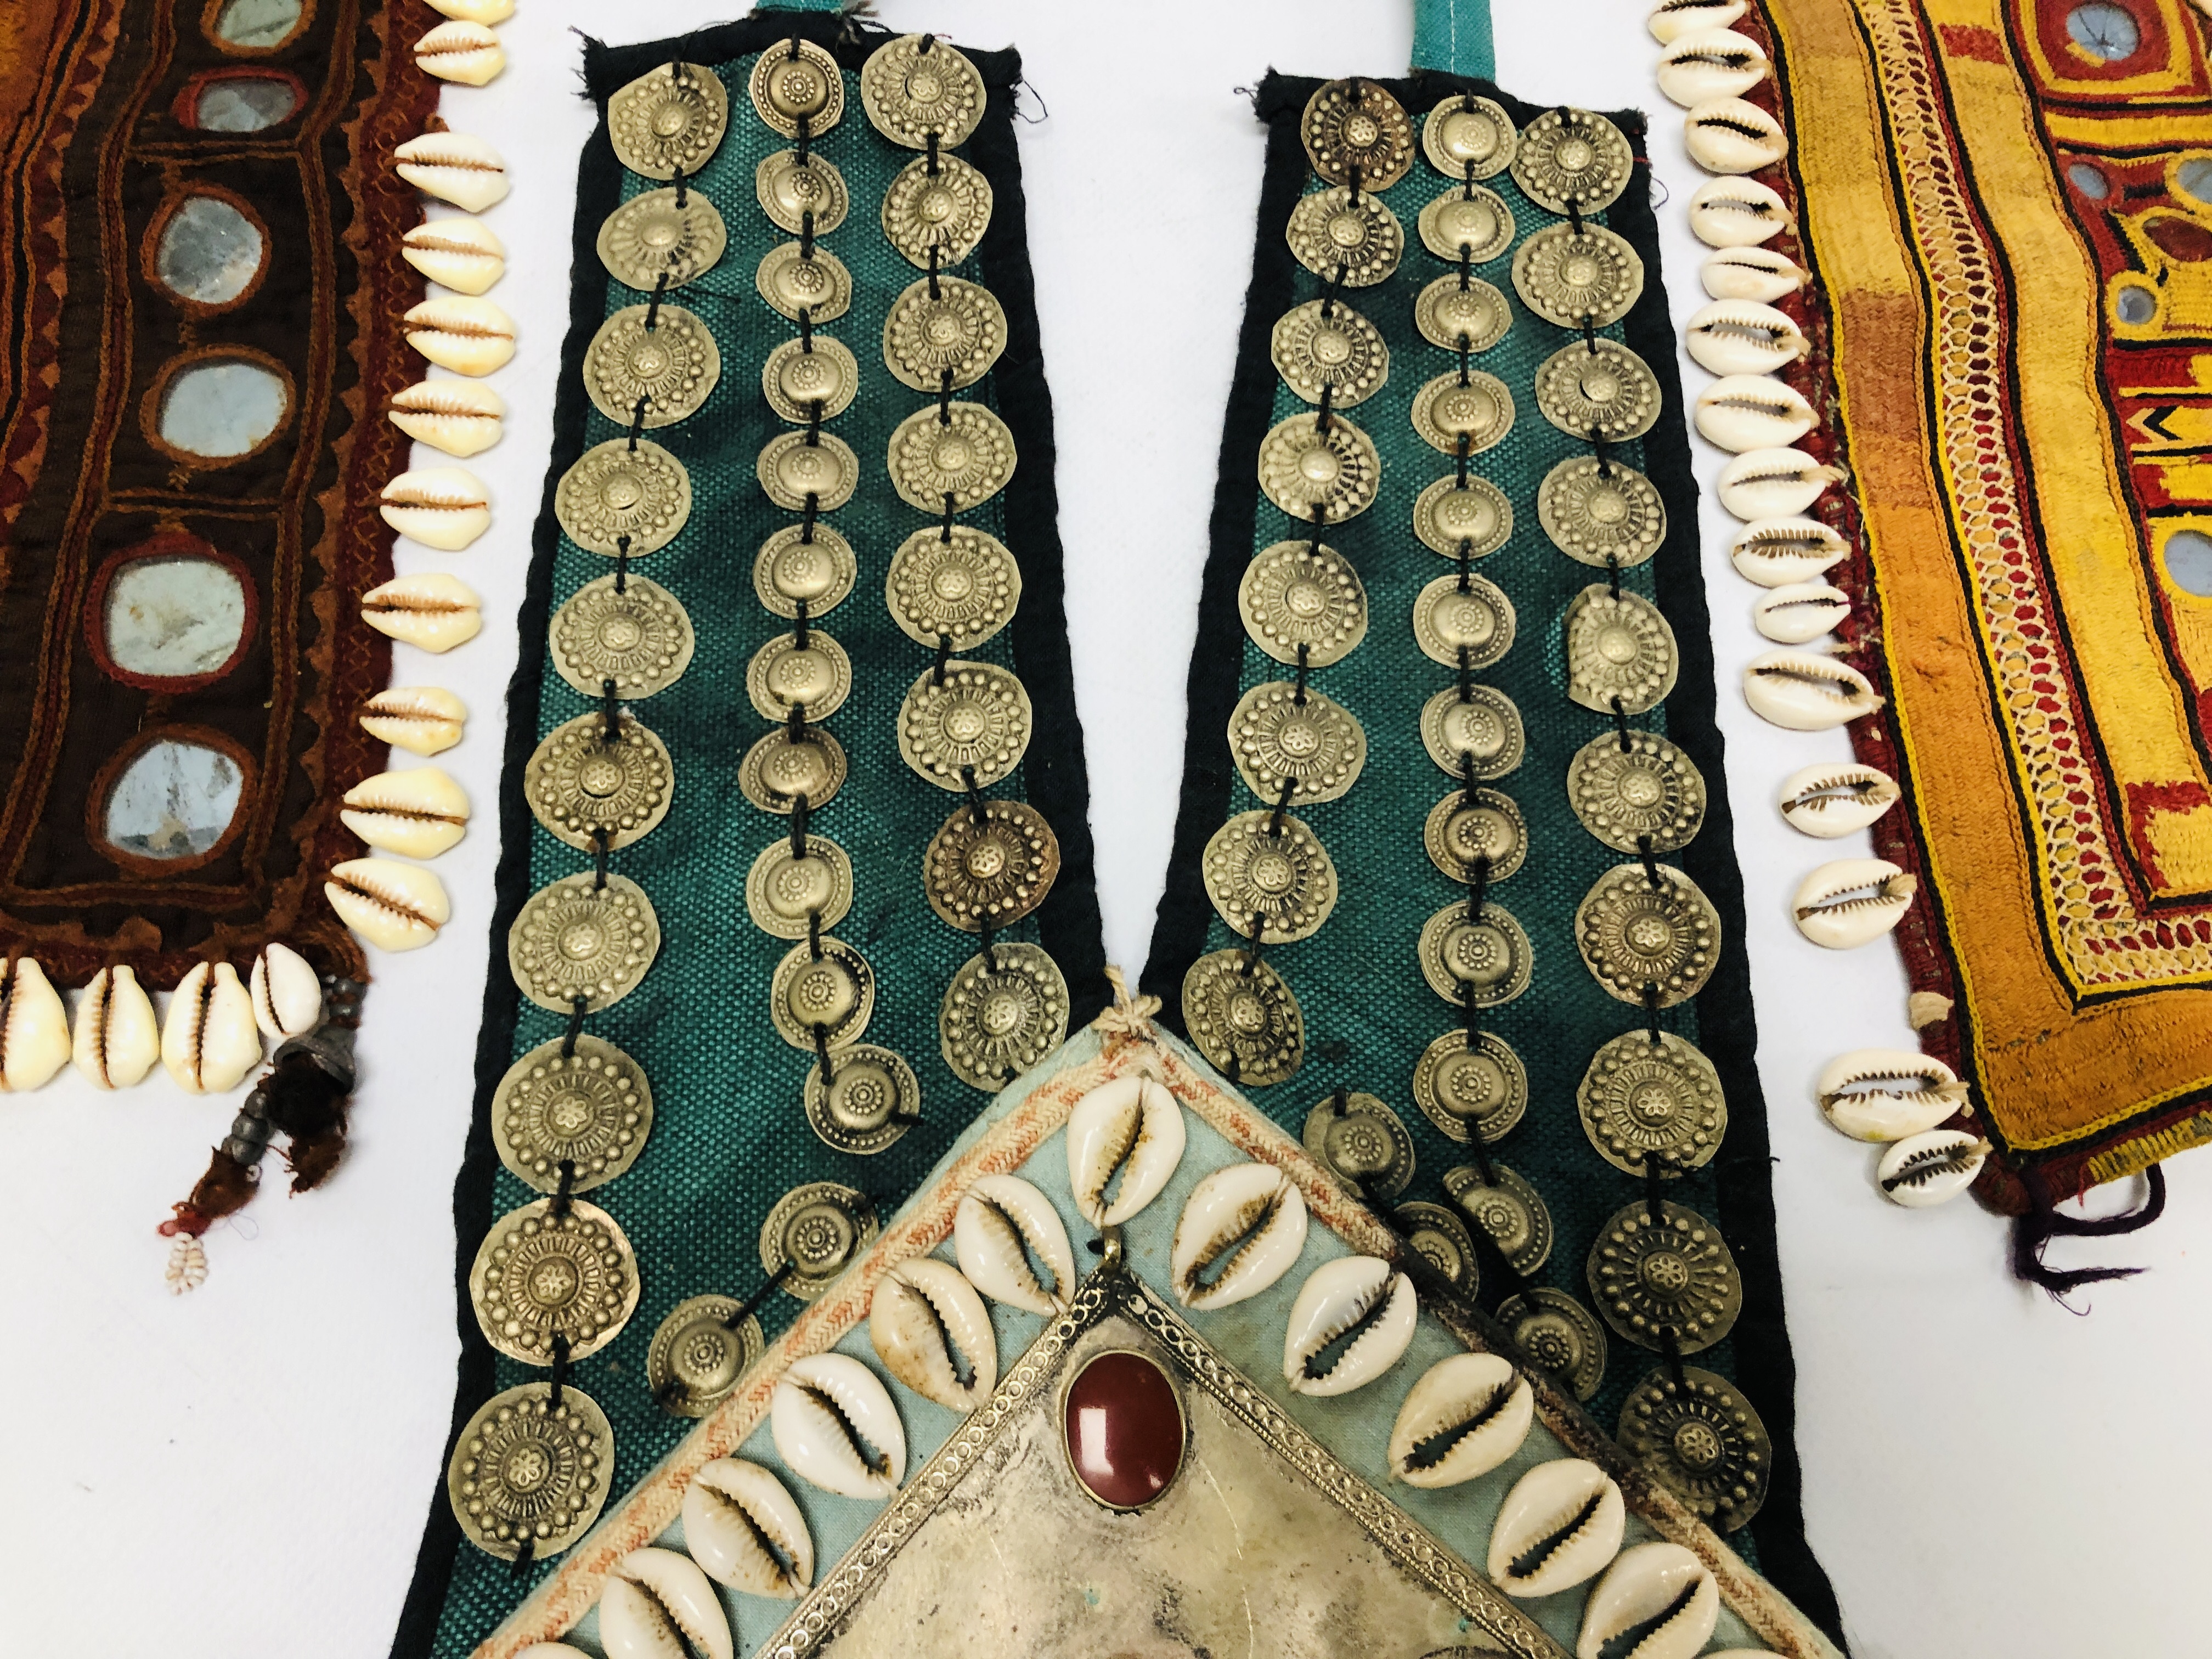 A GROUP OF FIVE VARIOUS AFGHAN TEXTILE PIECES APPLIED WITH COWRIE SHELLS AND OTHER DECORATION - Image 9 of 10